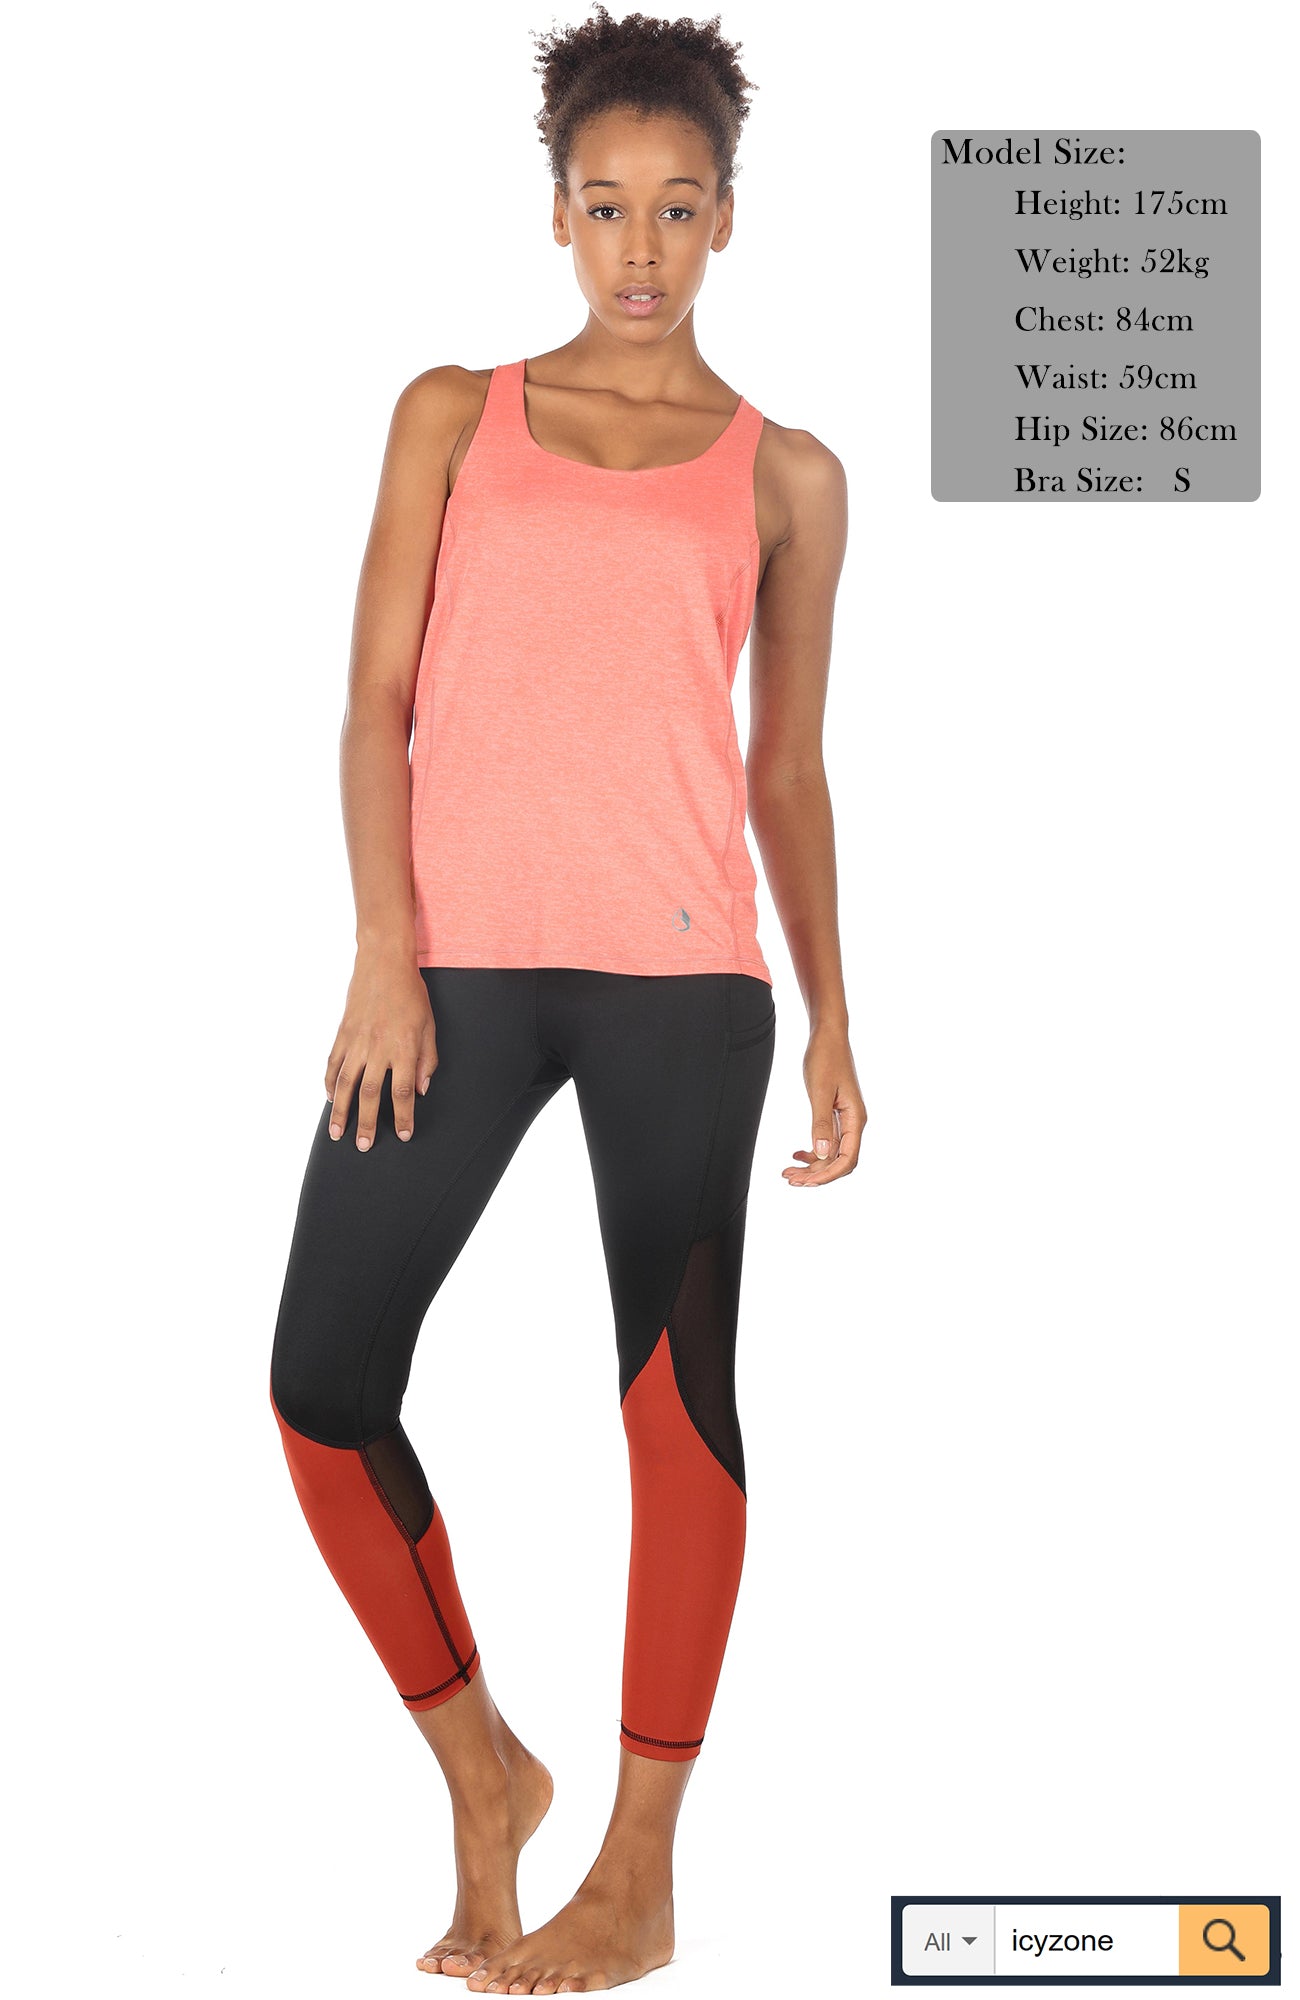 icyzone Workout Tank Tops Built in Bra - Women's India